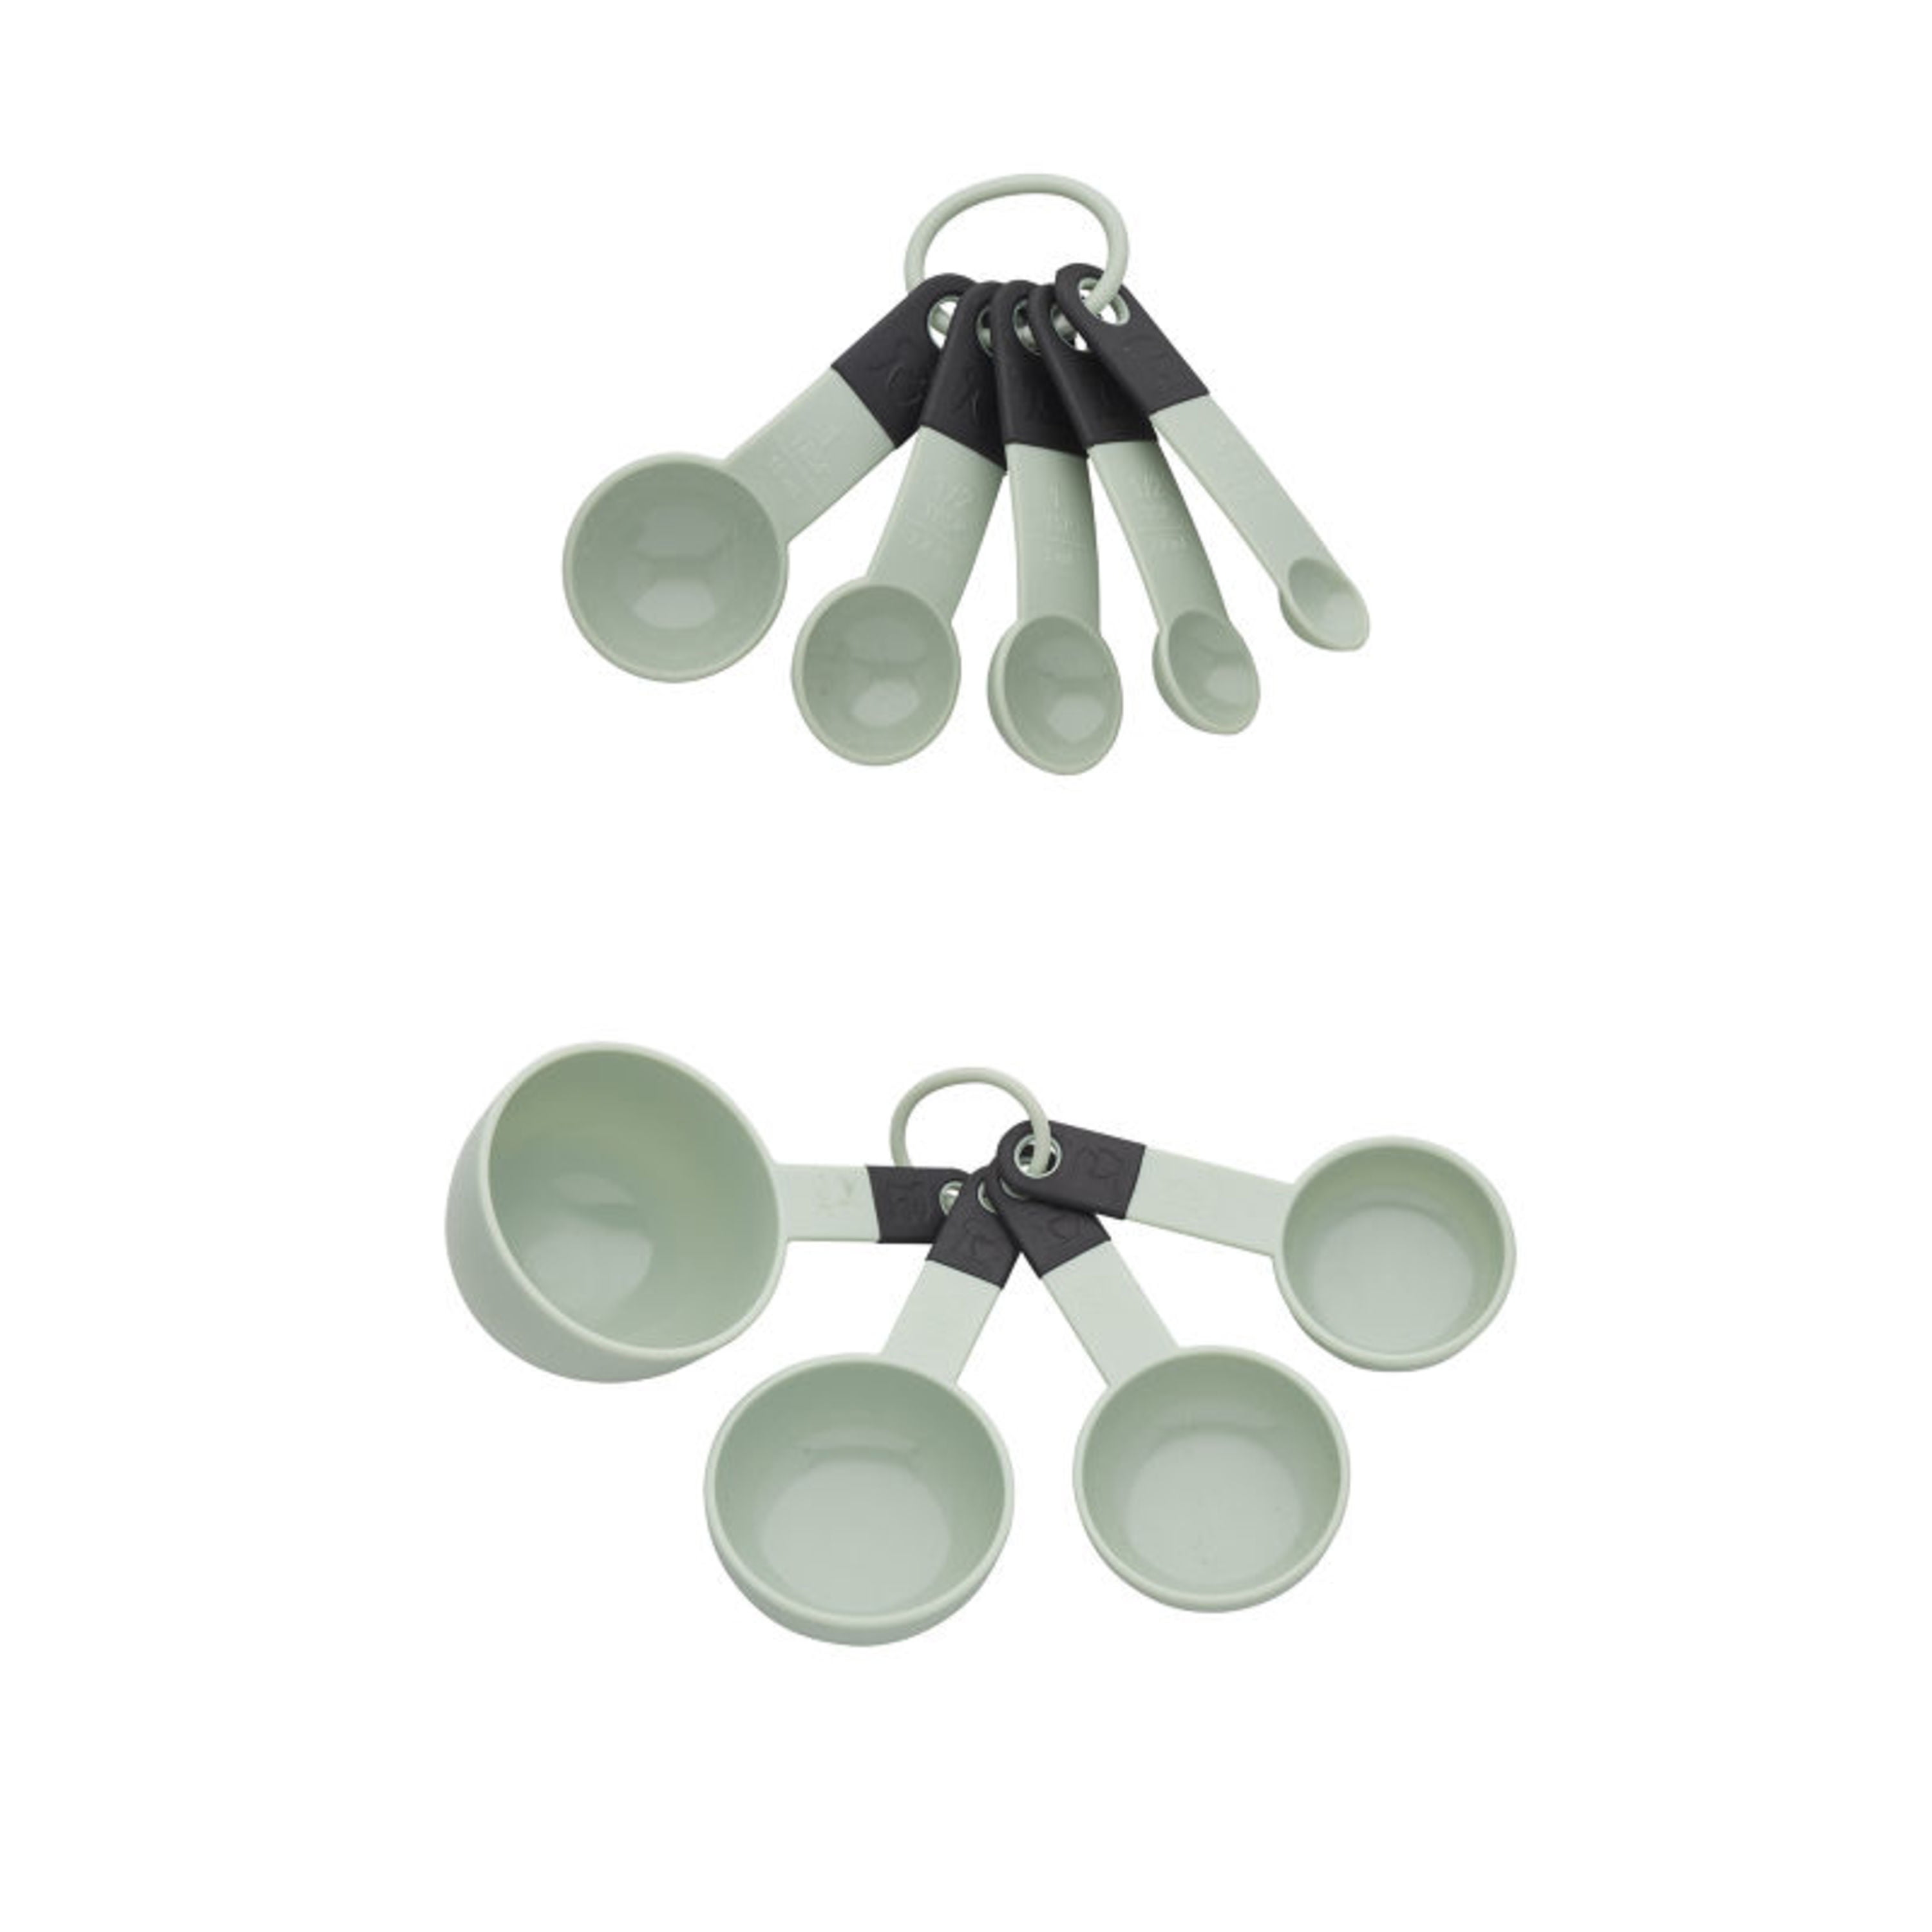 Kitchenaid Measuring Cups & Spoons Plastic - household items - by